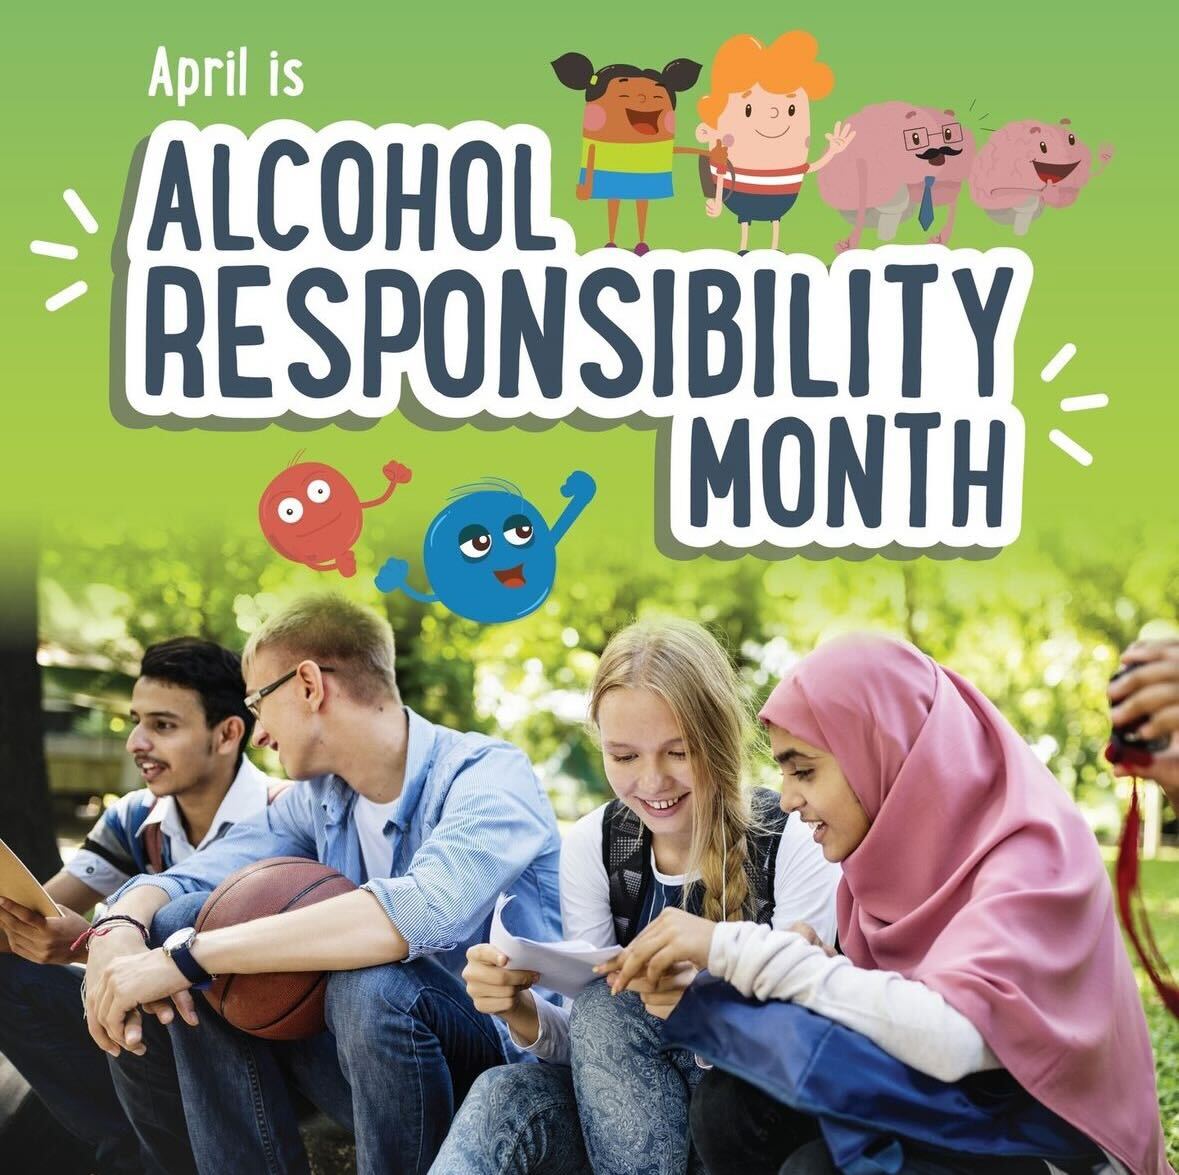 That’s a wrap on #AlcoholResponsibilityMonth! We hope you learned something new to use when talking to kids about the dangers of underage drinking. Although April is over, it's never a bad time to have a conversation about saying 'NO' to underage drinking! bit.ly/3xn6DG4